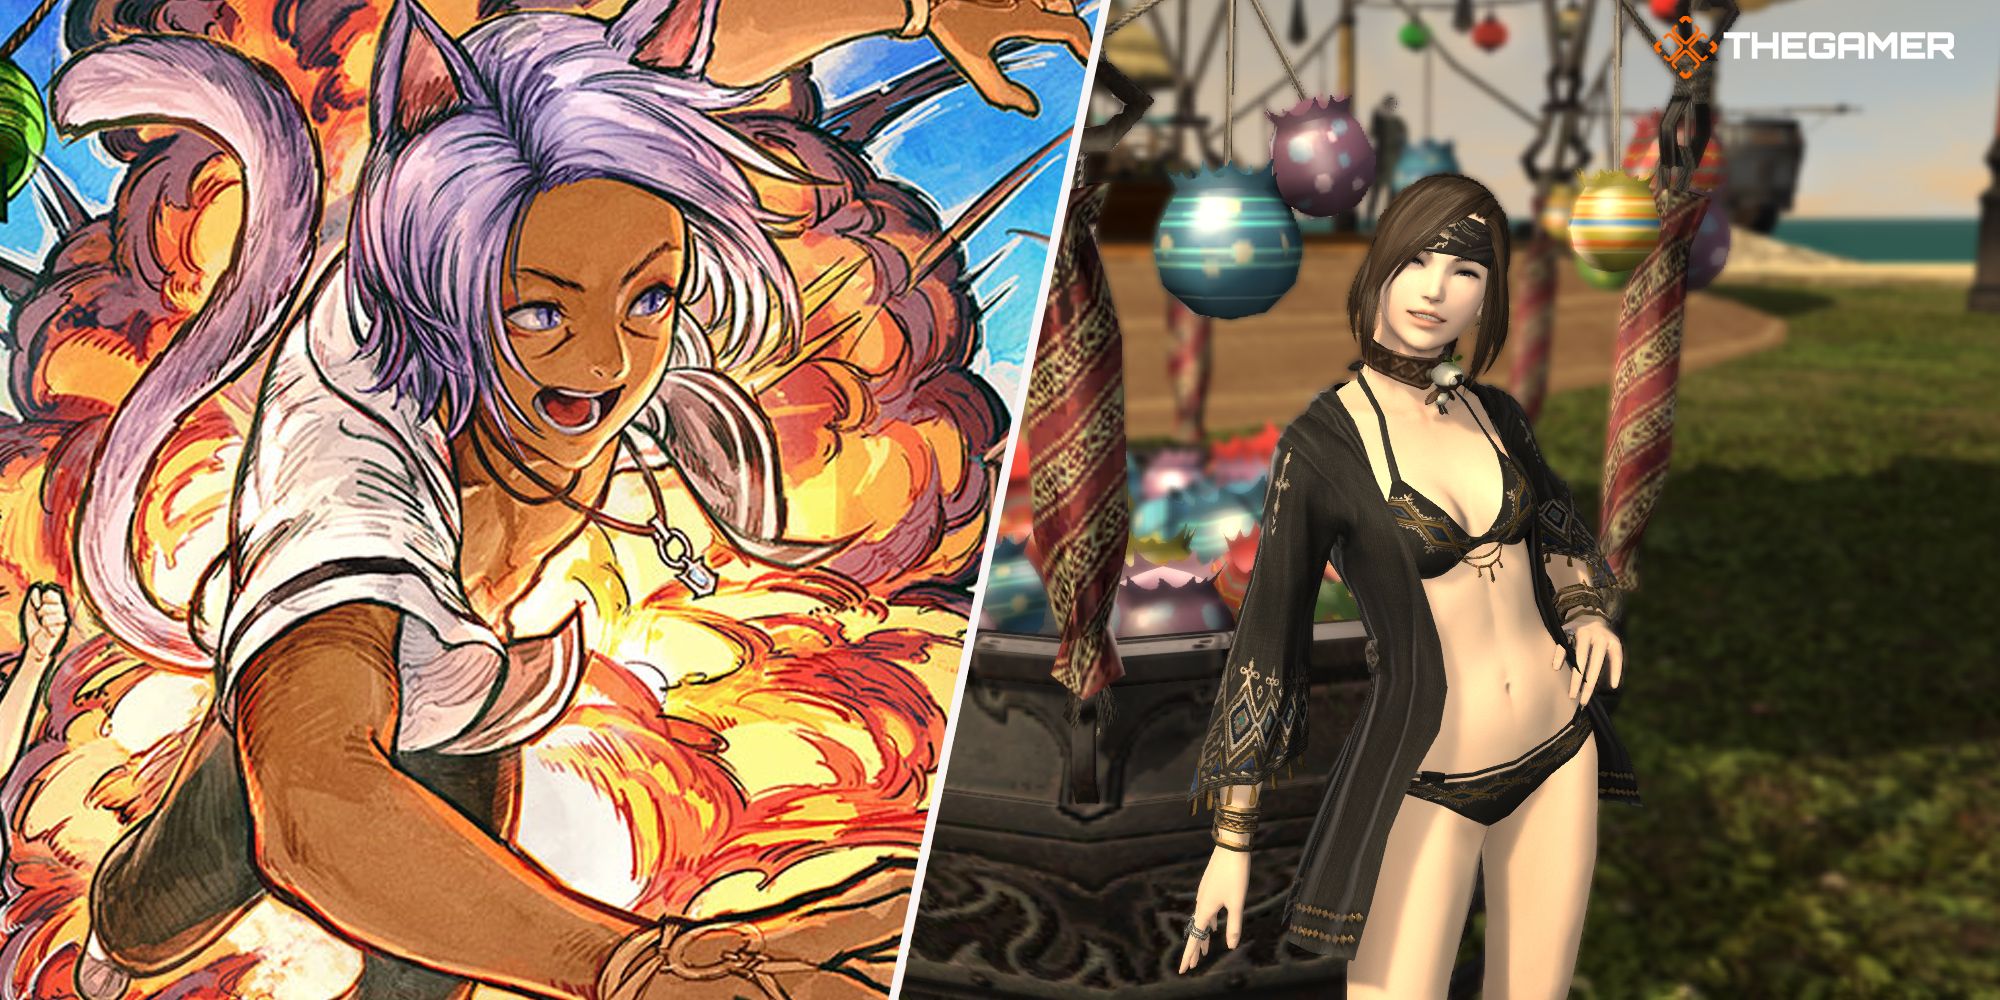 Final Fantasy 14 split image of Moonfire Faire artwork and player in Summer Sunset event gear